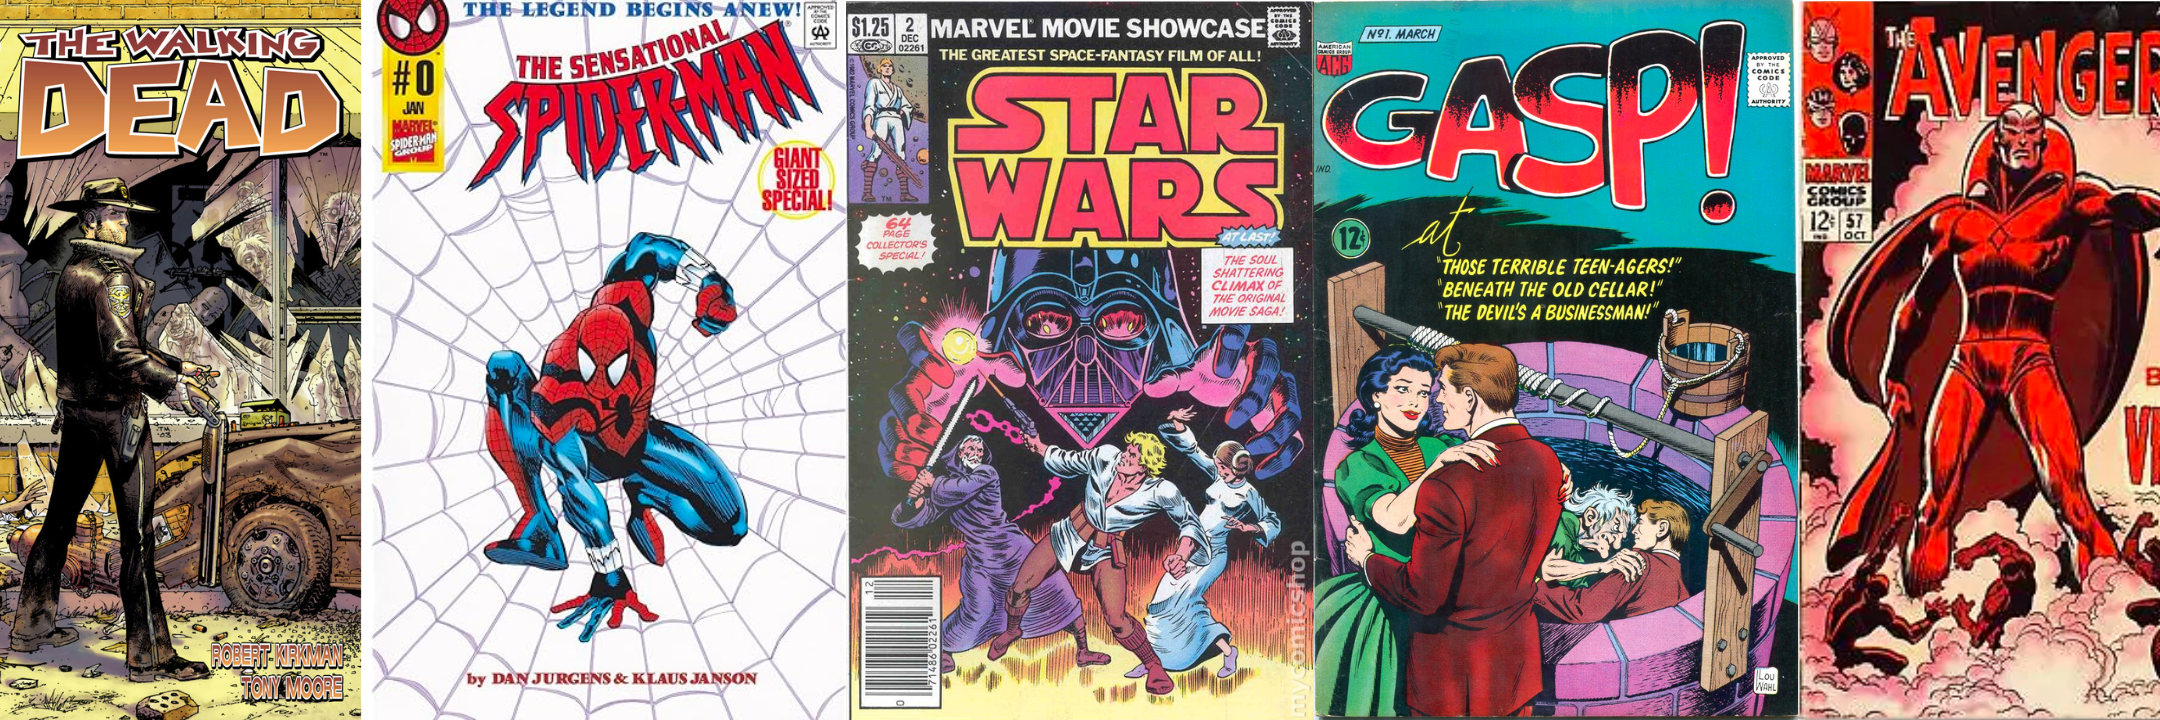 Comic Book Collage with The Walking Dead, Spider-Man, Star Wars, Gasp, and The Avengers